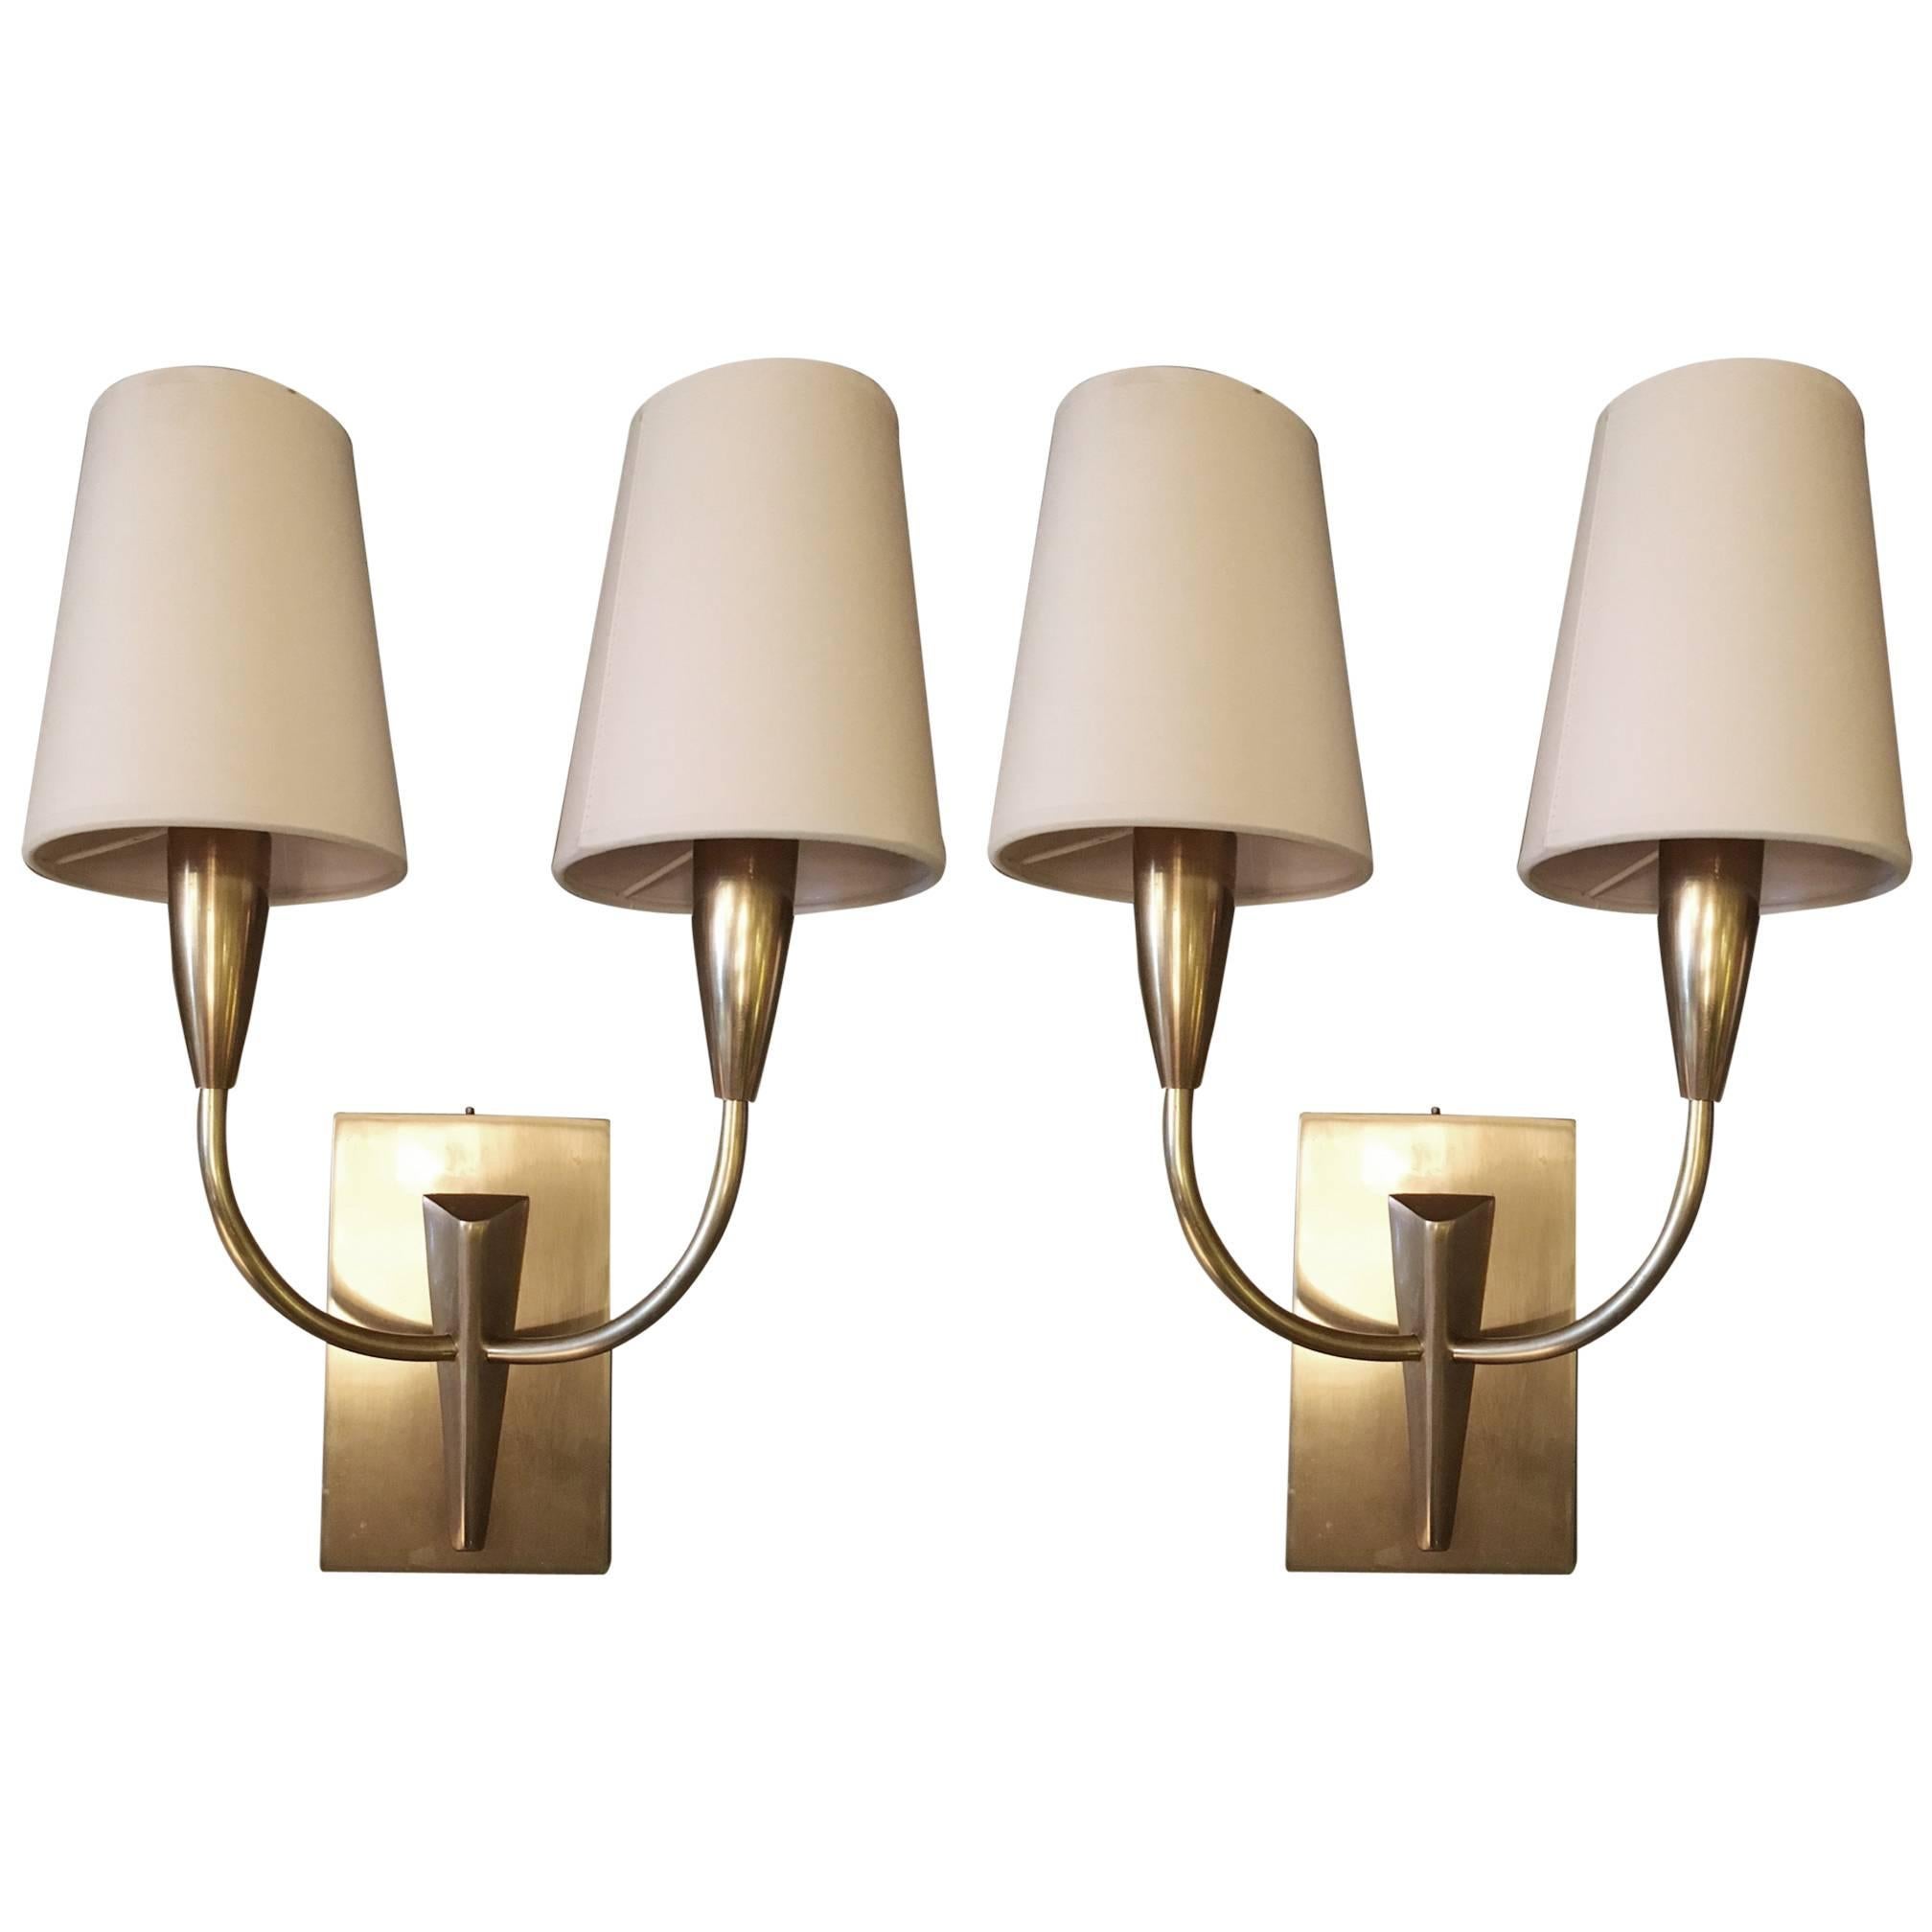 Pair of Wall Sconces with Shades